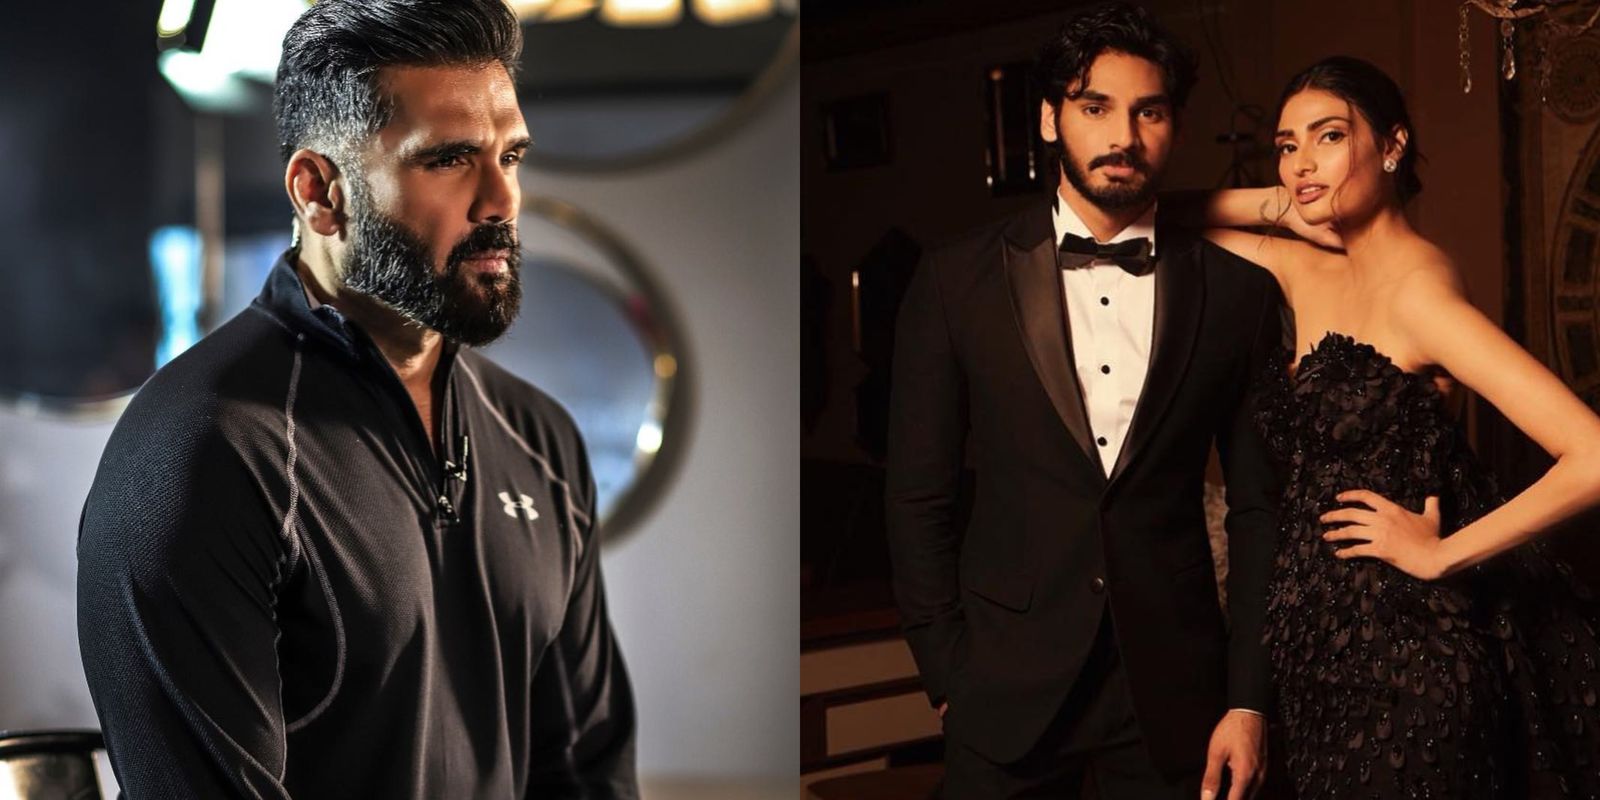 Suniel Shetty On Nepotism Says He Hasn't Forced His Kids Athiya And Ahan Into Films: 'People Have Seen Something In Them'